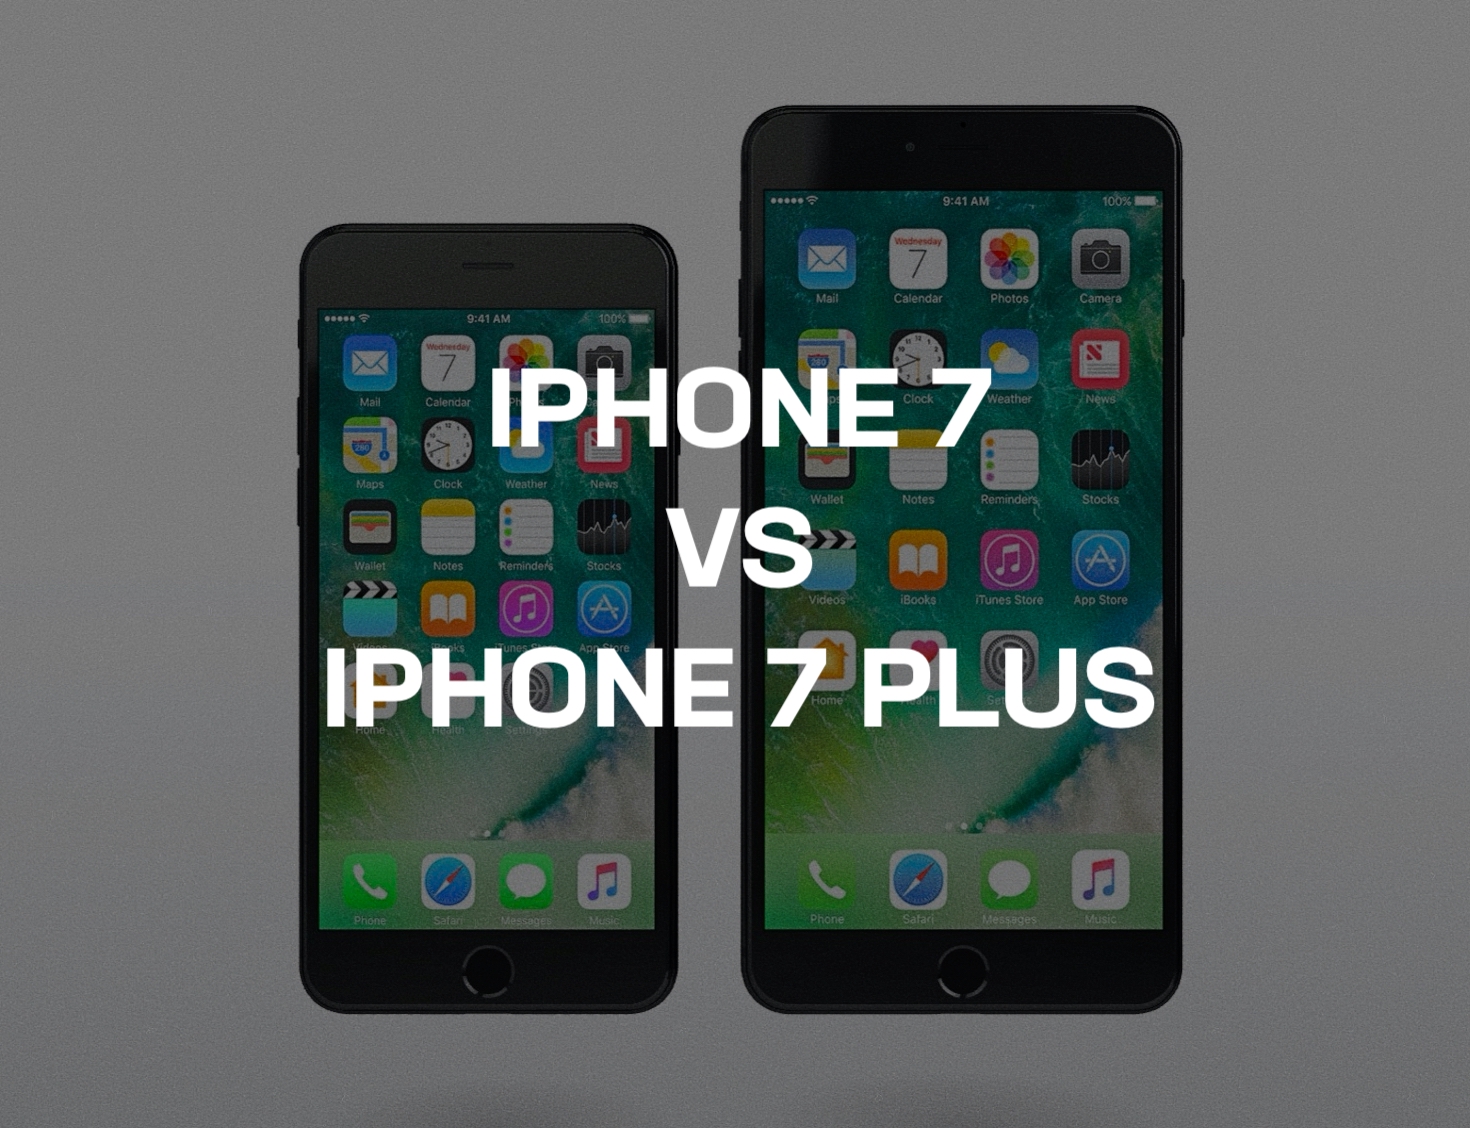 iPhone 7 vs iPhone 7 Plus – which should you buy?